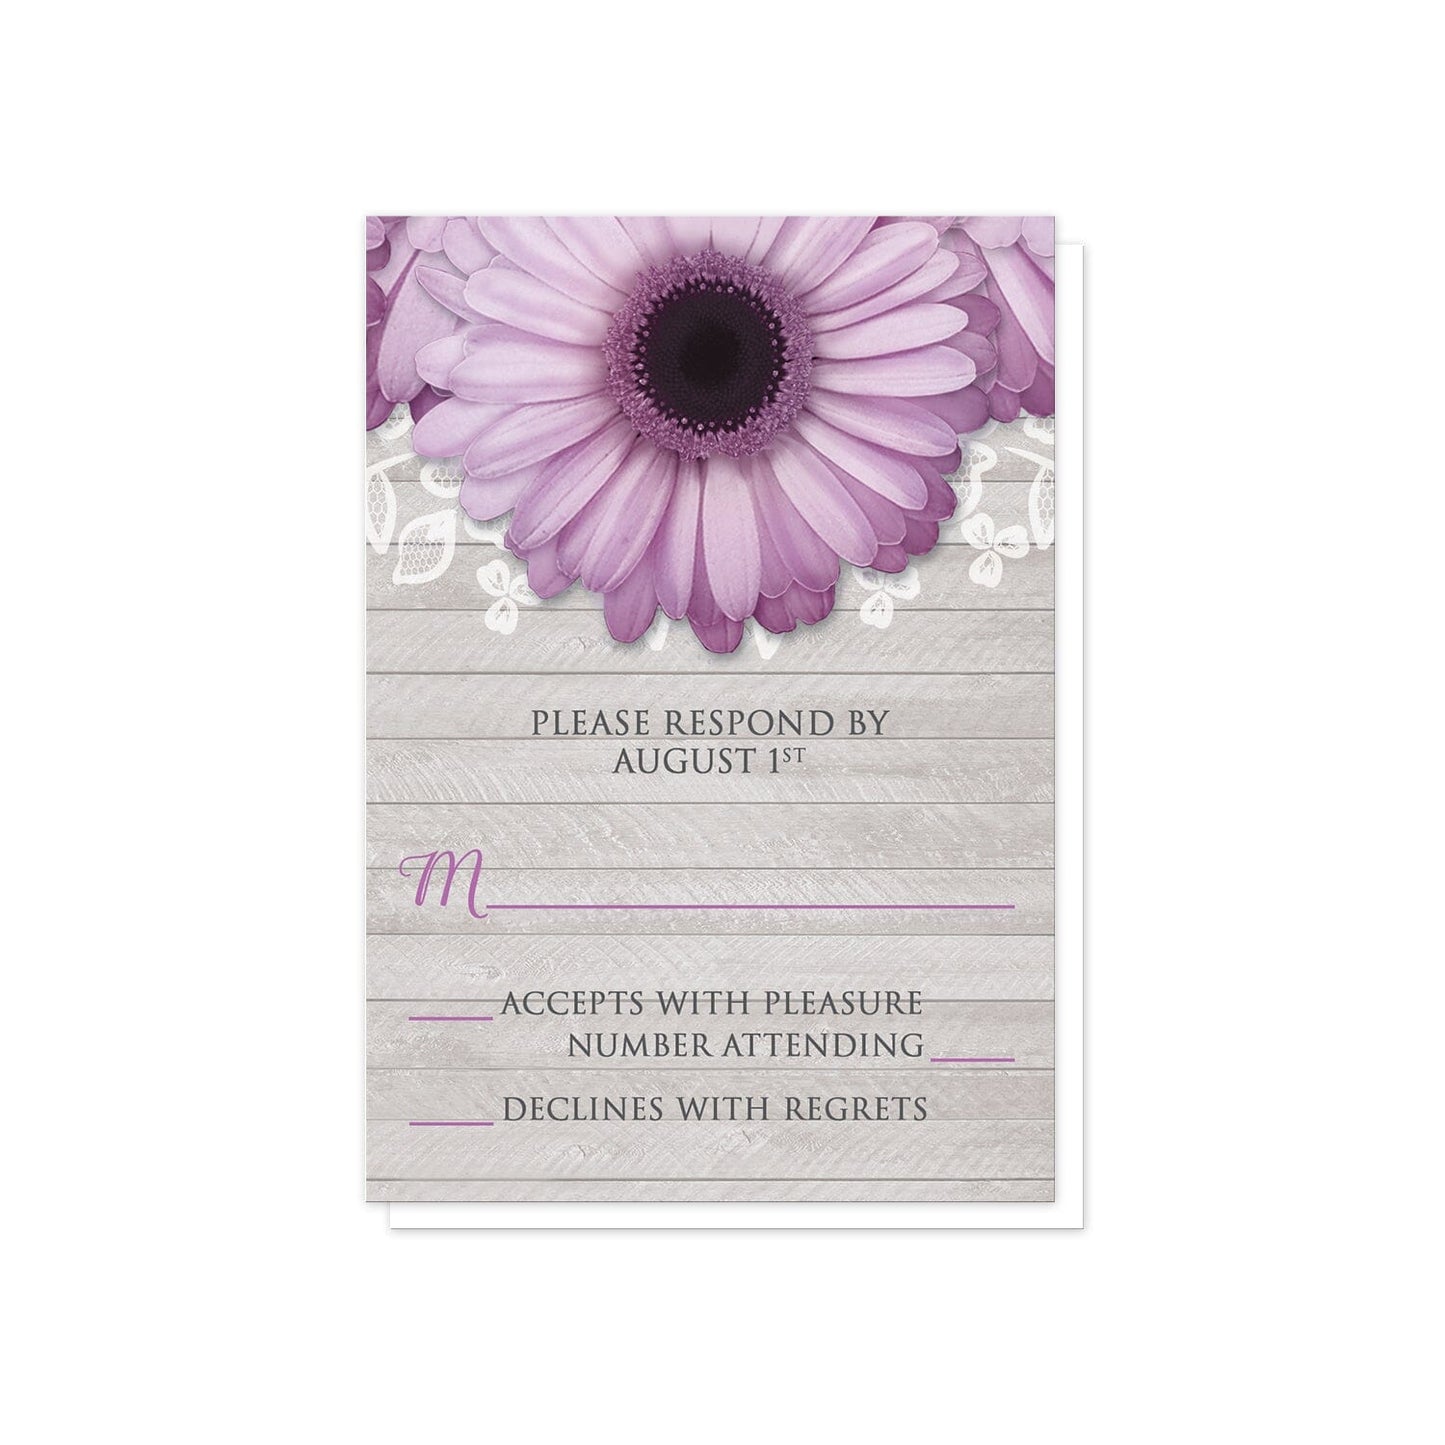 Rustic Purple Daisy Gray Wood RSVP Cards at Artistically Invited.